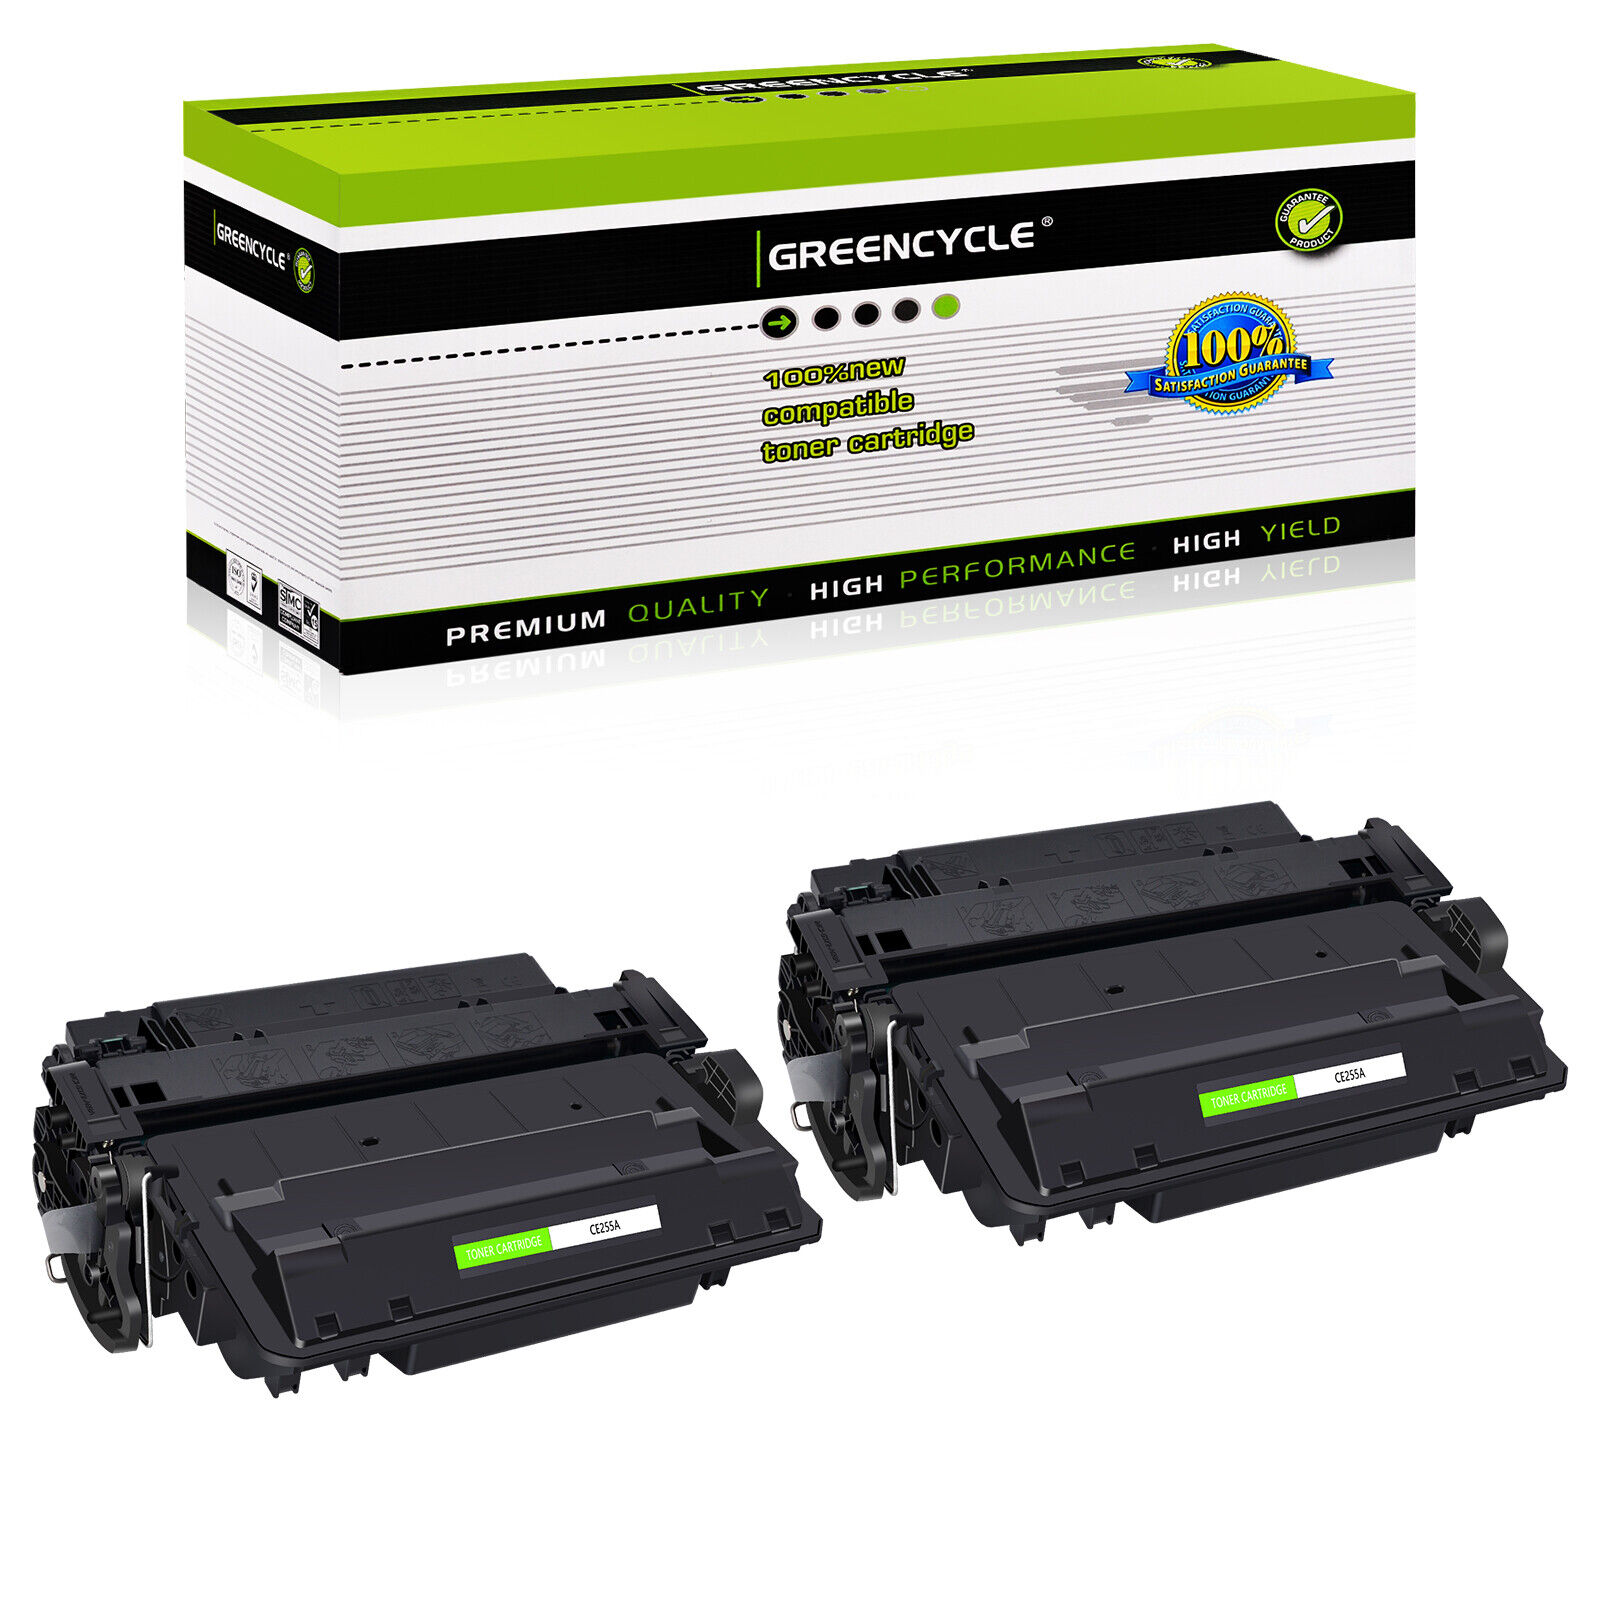 GREENCYCLE 2PK 55A CE255A Toner Cartridge Fits for HP LaserJet P3015d 3015n 3016